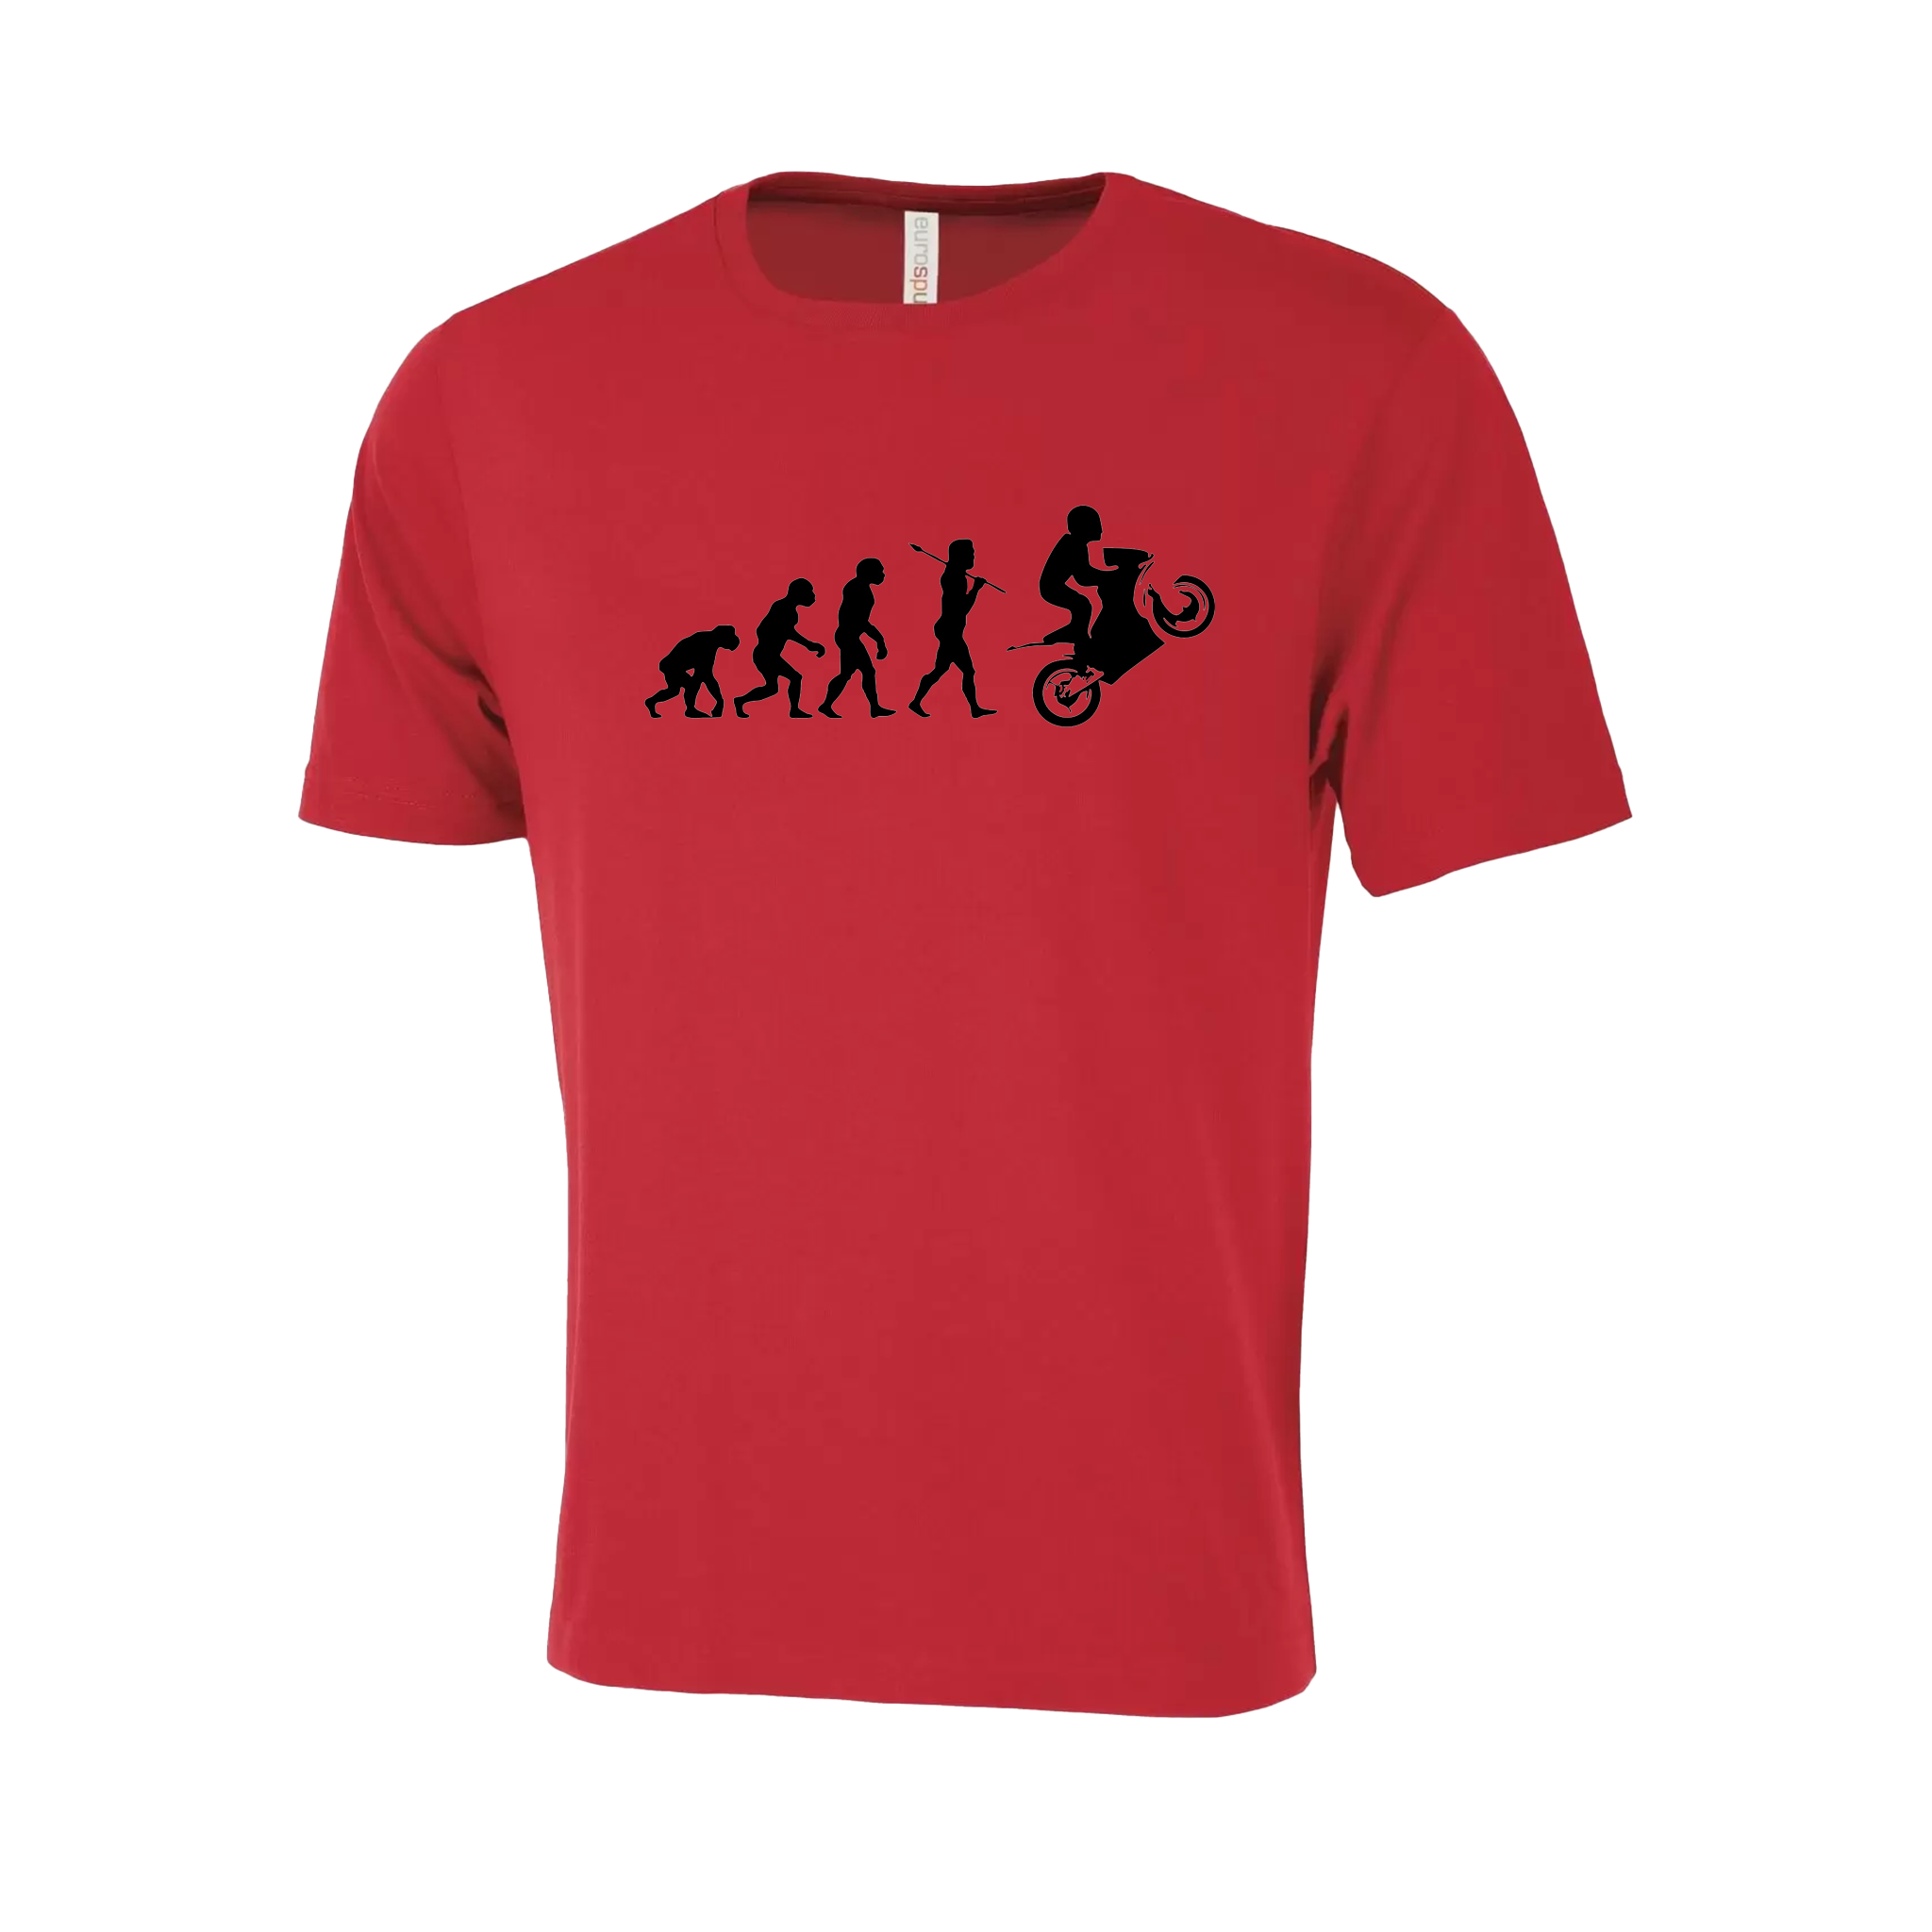 Motorcyclist Evolution Novelty T-Shirt - Adult Unisex Sizing XS-4XL - Red